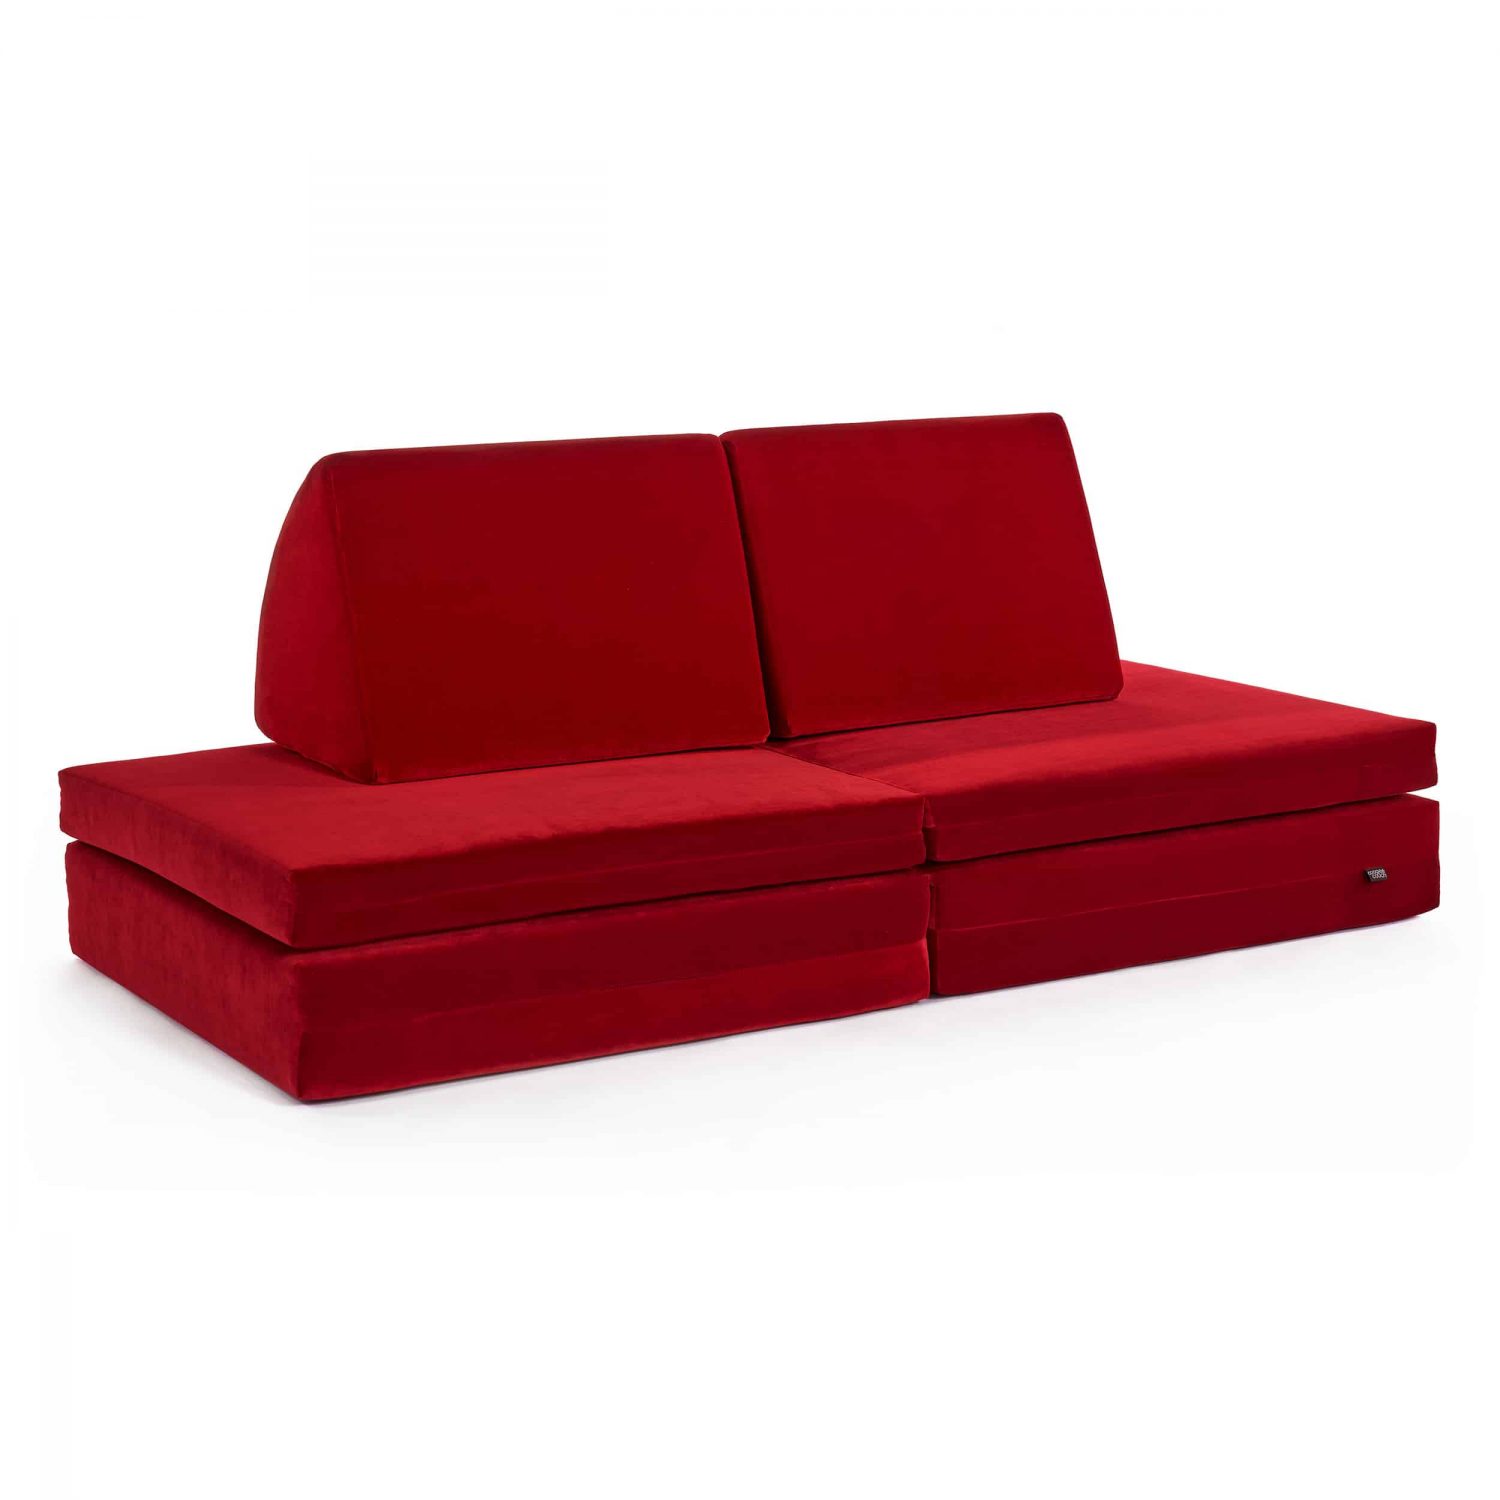 coogeecouch | Kindersofa | Serie: scuderia-fantasia | Farbe: chilli-red hellrot | Ansicht: Front schräg | made in Germany